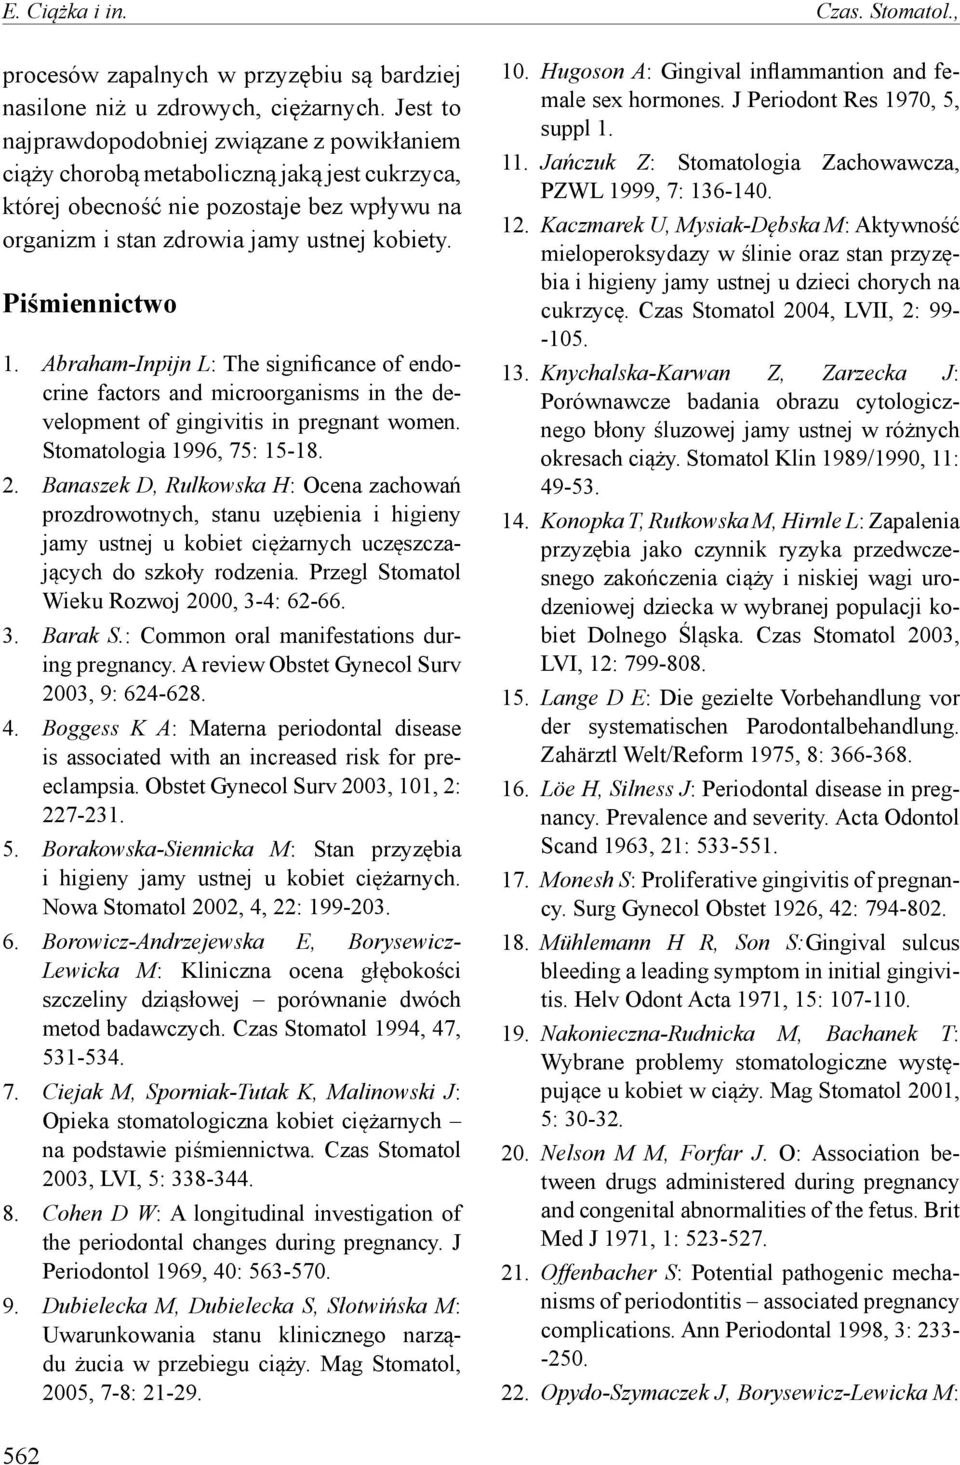 Piśmiennictwo 1. Abraham-Inpijn L: The significance of endocrine factors and microorganisms in the development of gingivitis in pregnant women. Stomatologia 1996, 75: 15-18. 2.